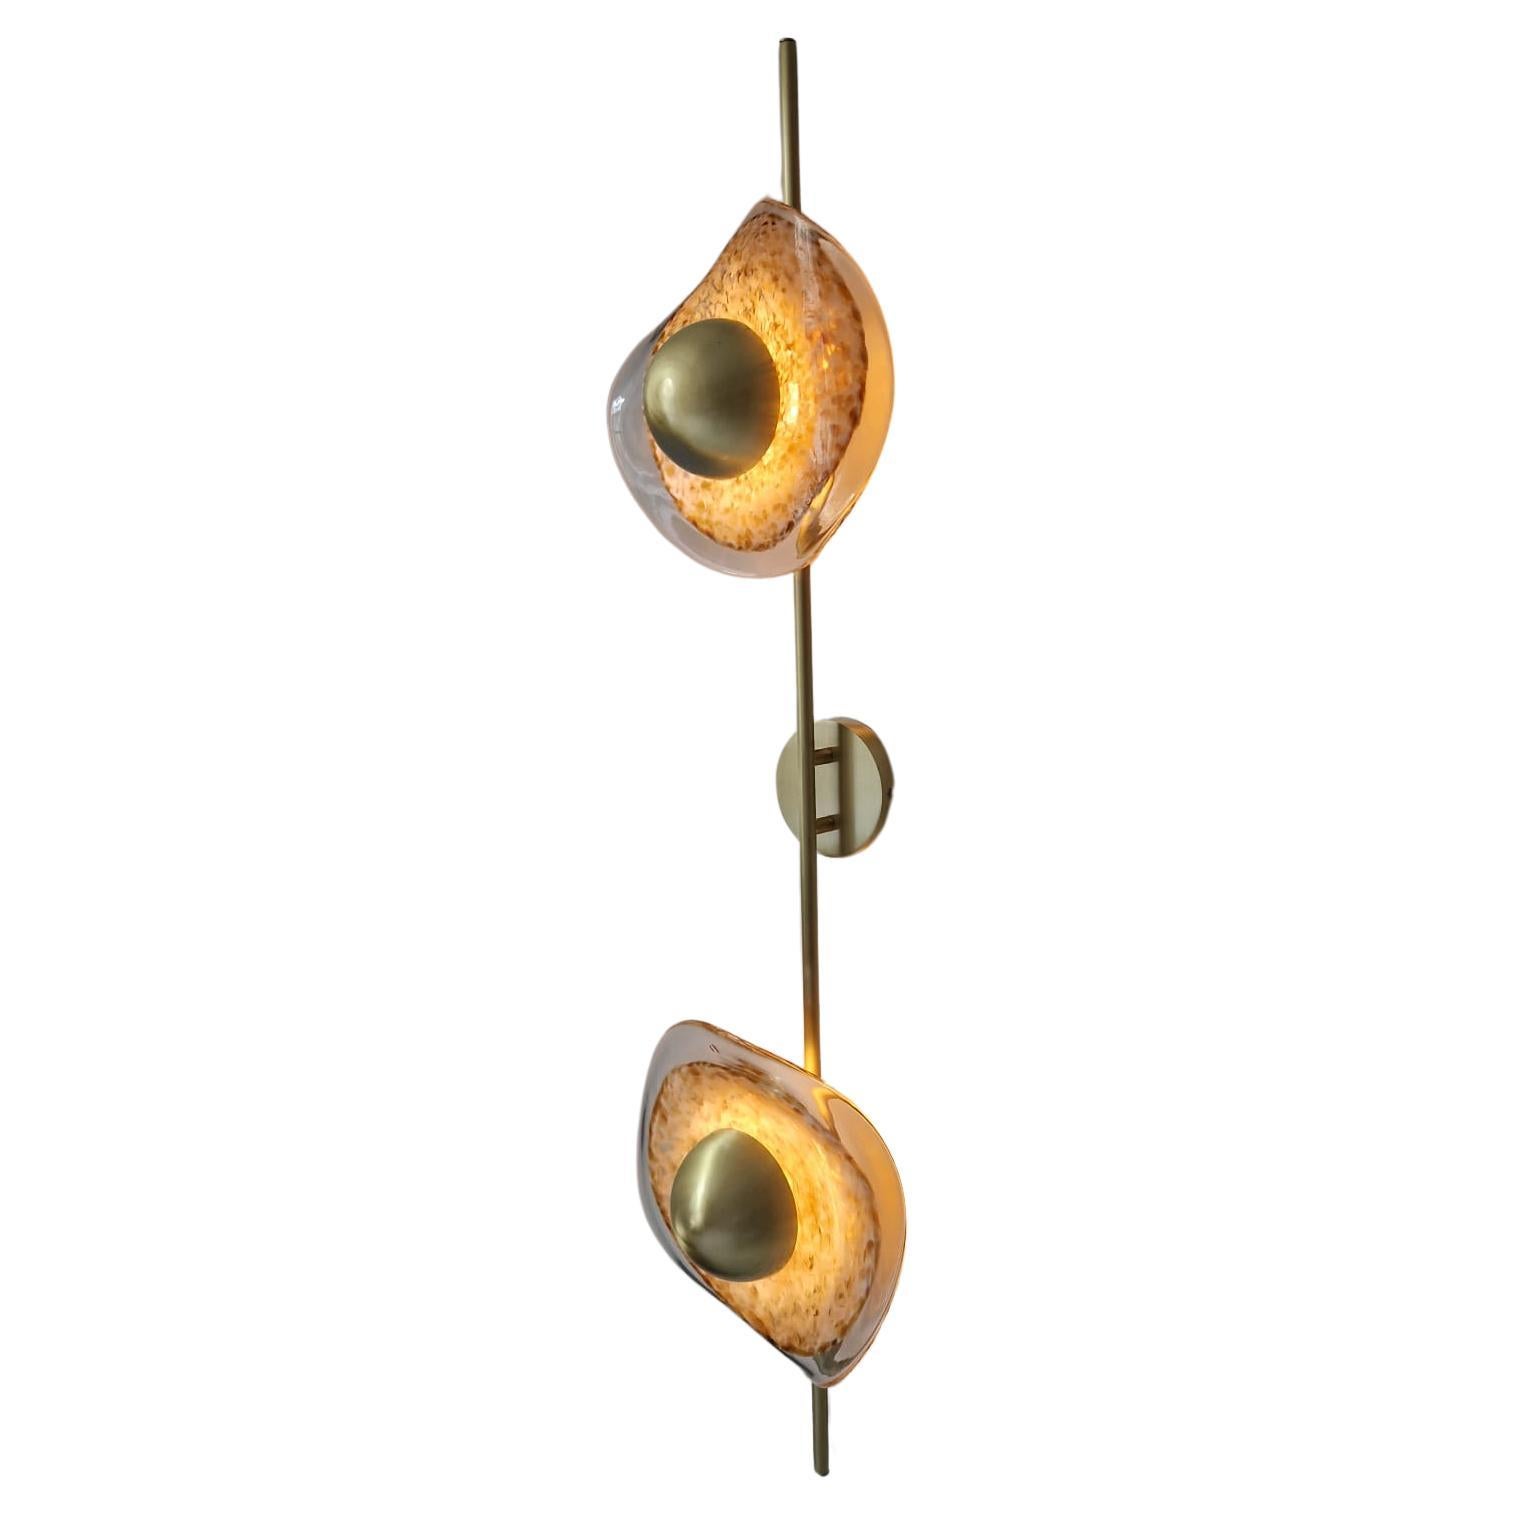 Imagin Ortus Wall Light in Brushed Brass and Decorative Glass